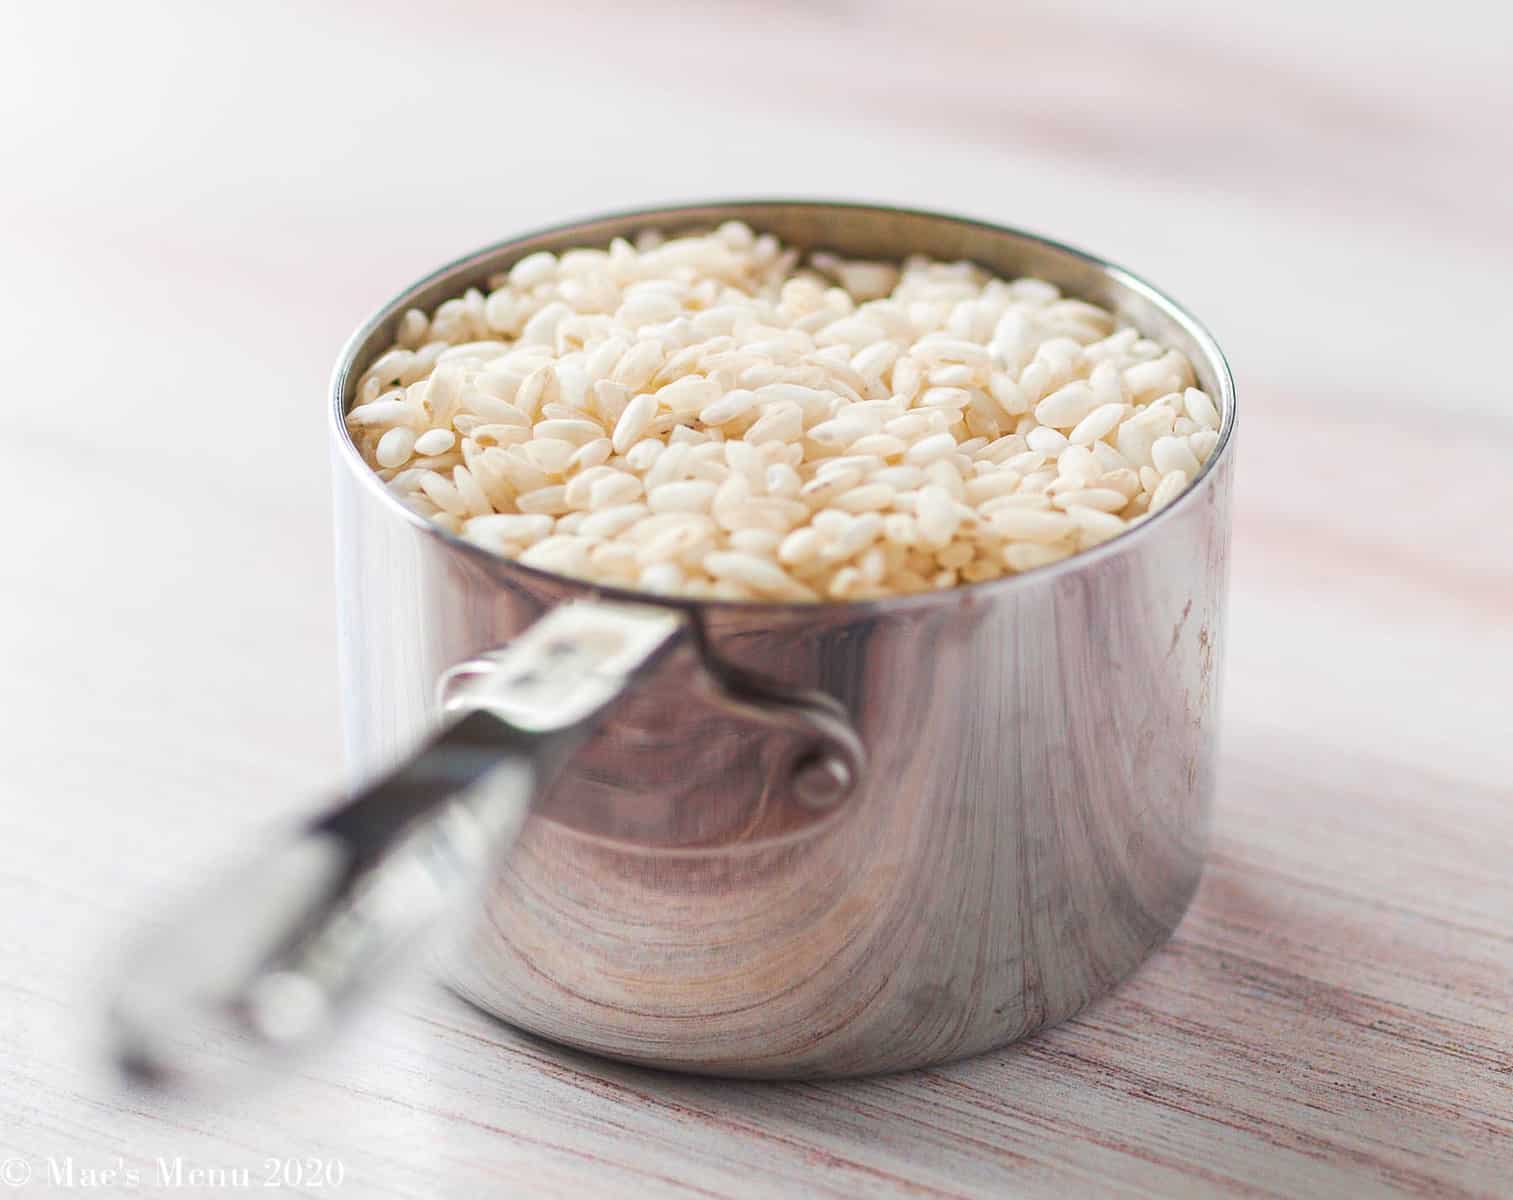 A measuring cup of risotto rice